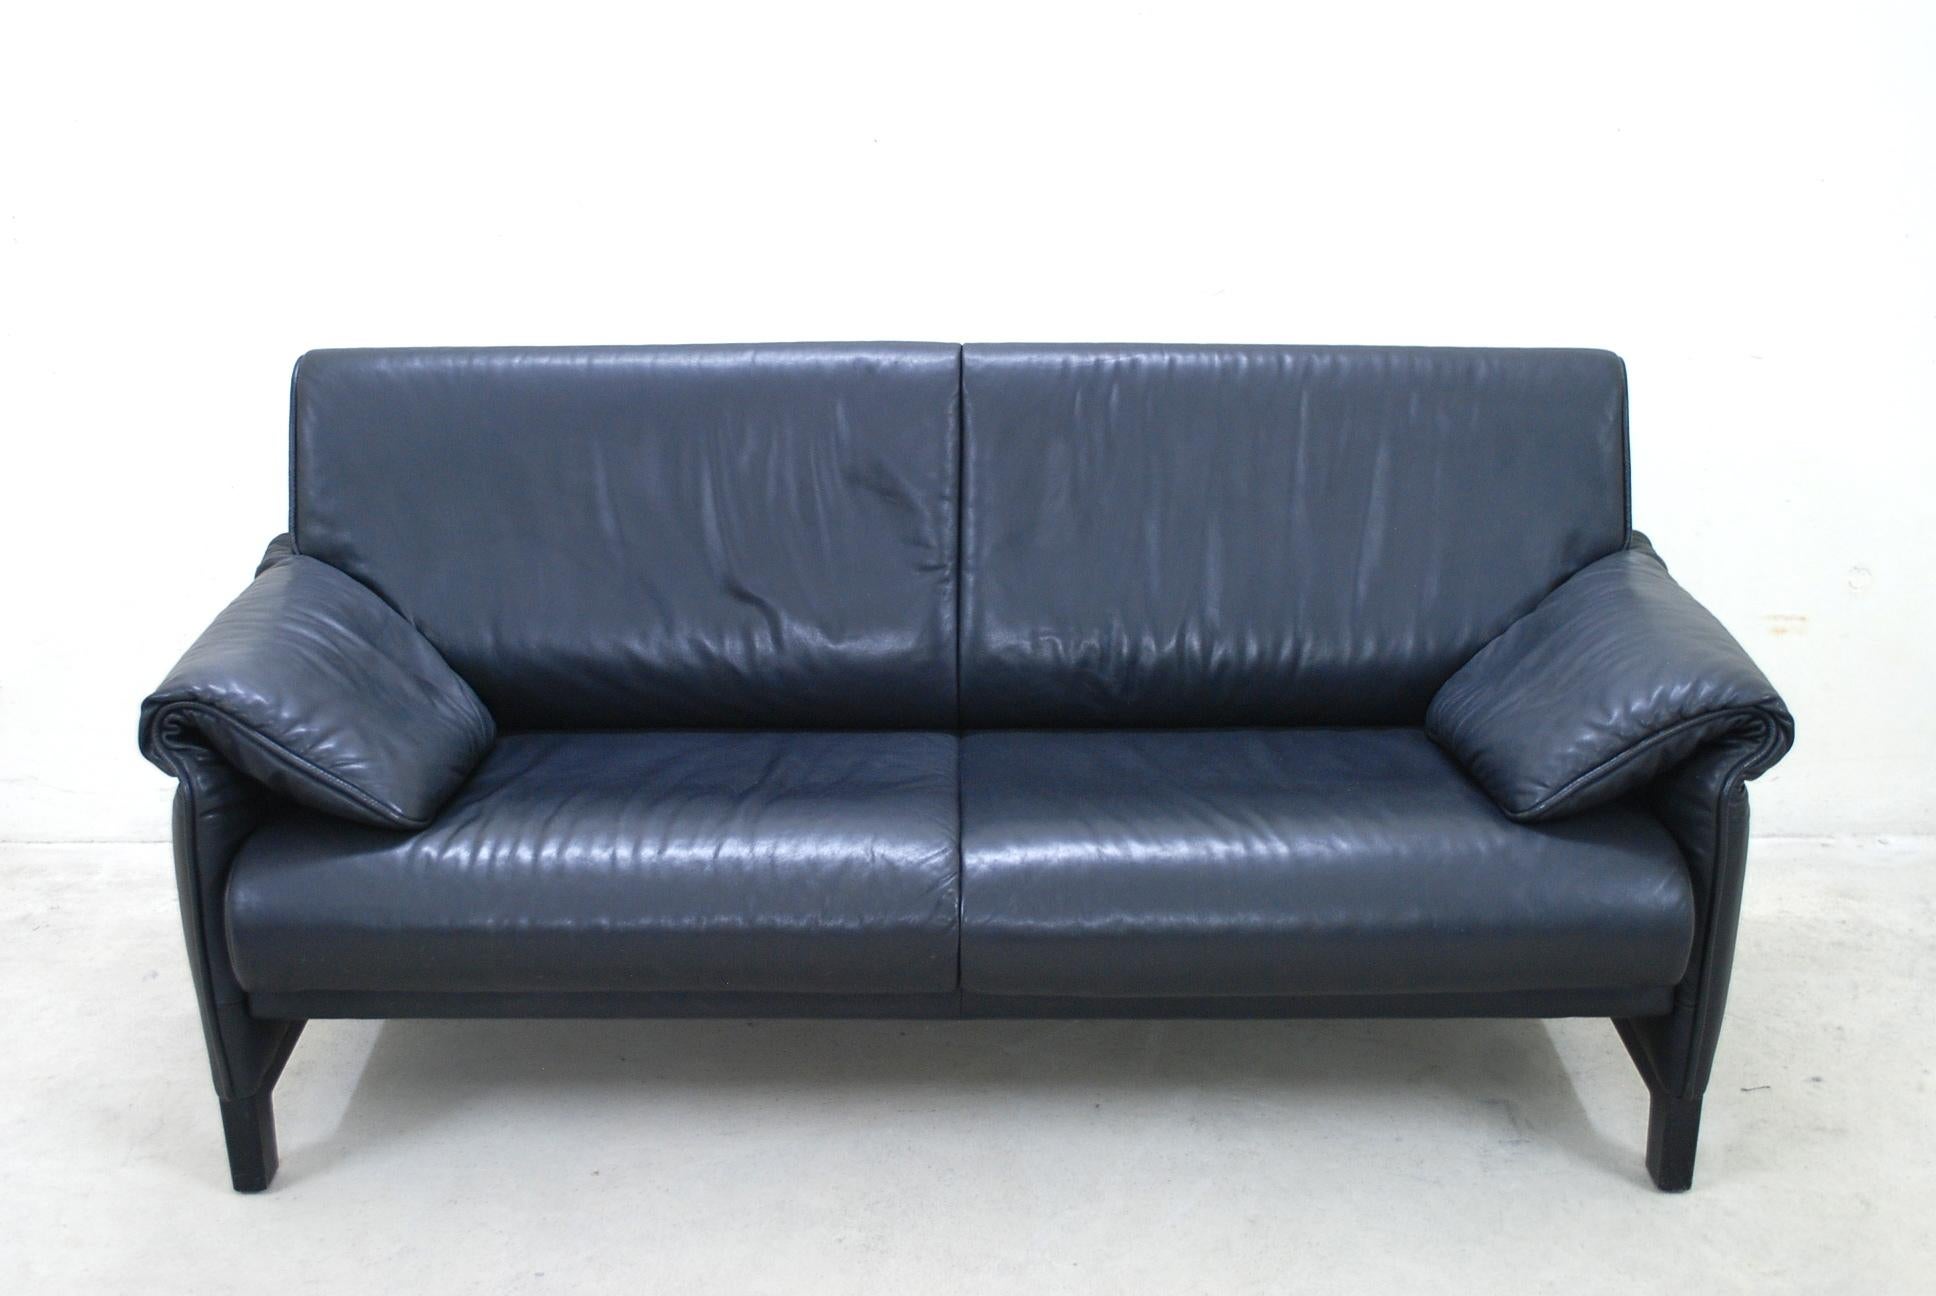 De Sede model DS 14 leather sofa.
Black aniline leather.
The legs were made of black lacquered wood.

We also had an armchair that fits well to this sofa.


 